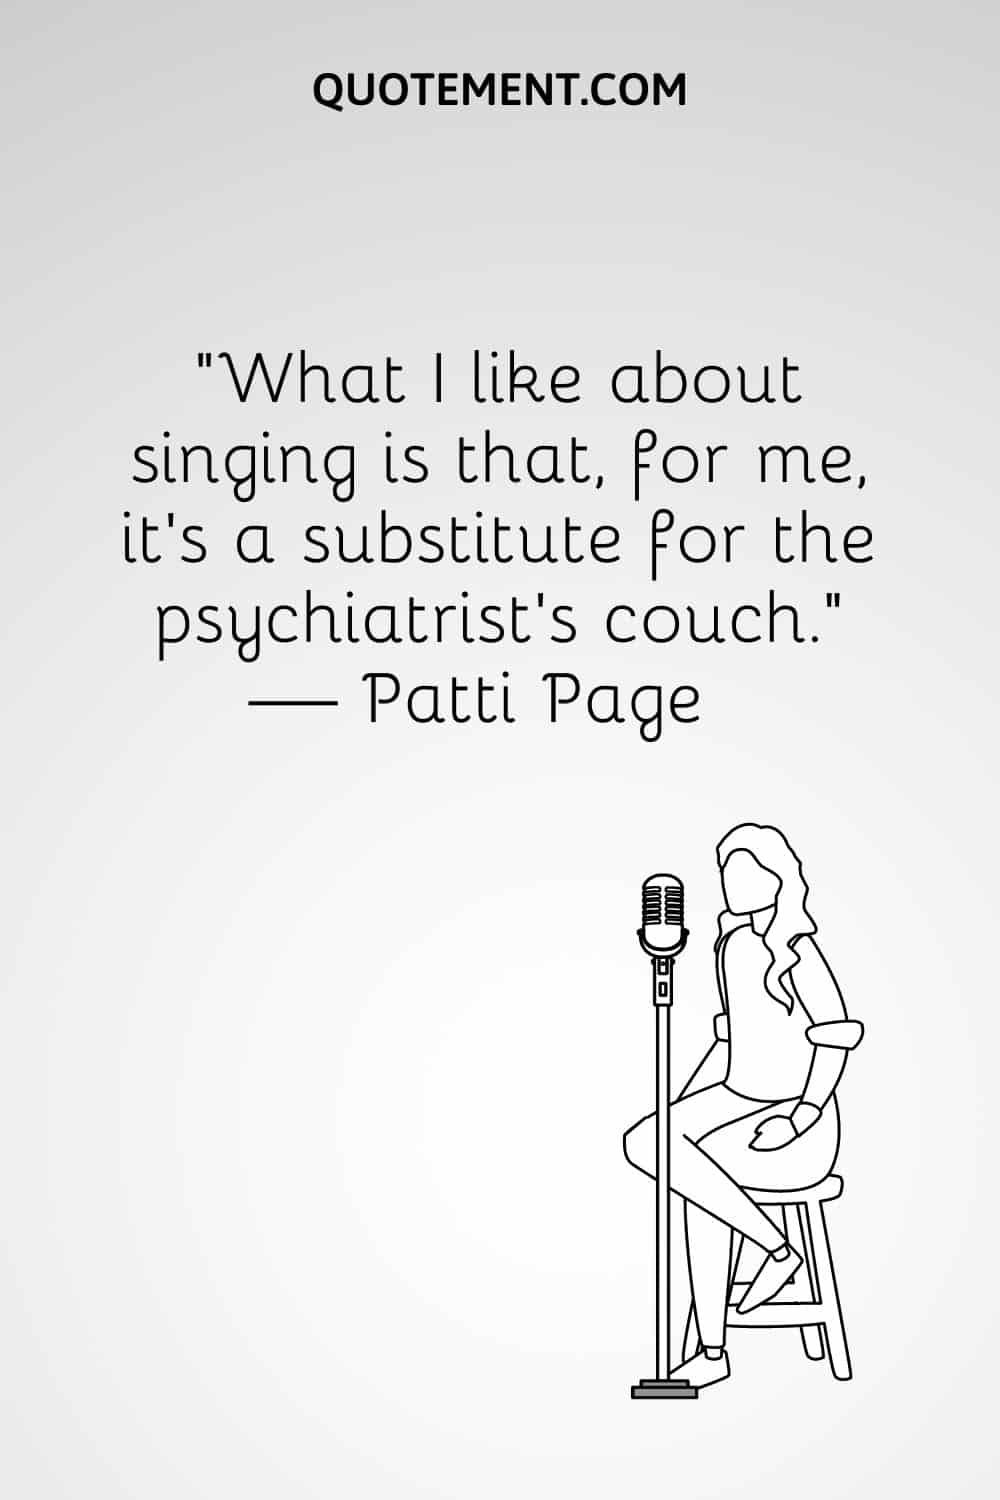 “What I like about singing is that, for me, it's a substitute for the psychiatrist's couch.” — Patti Page